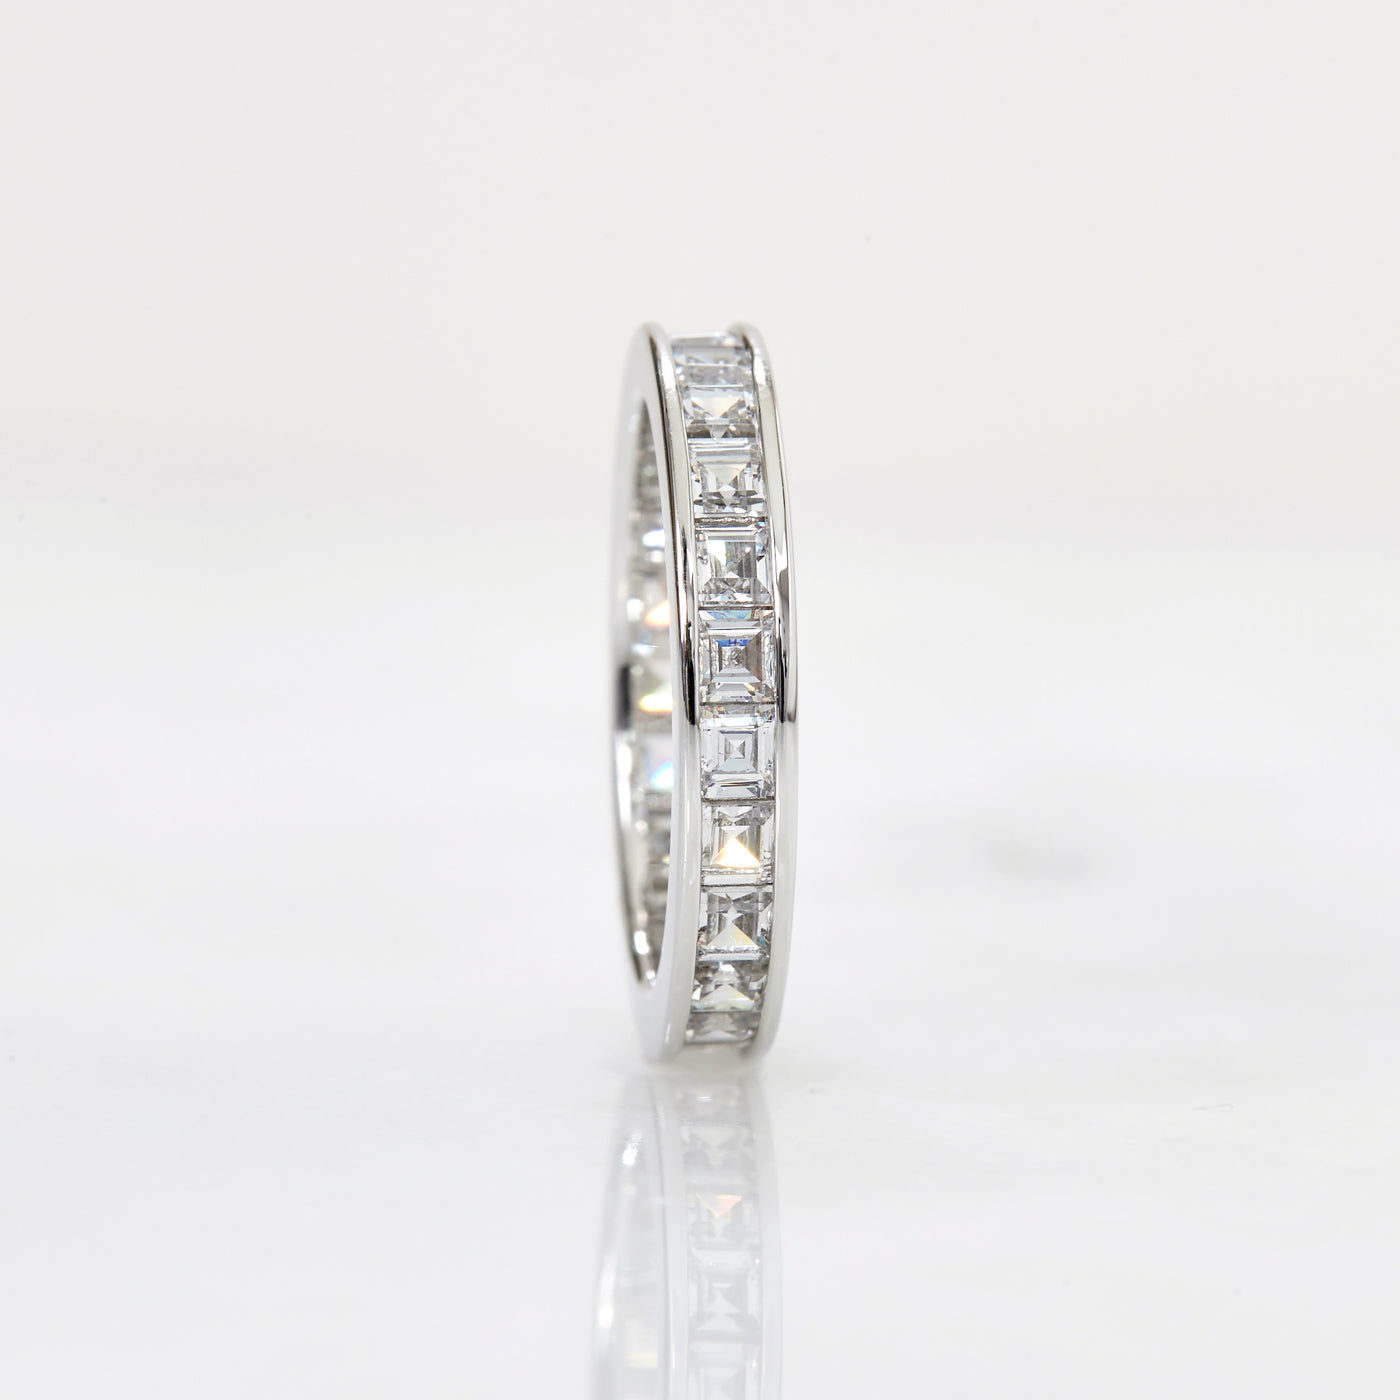 Princess 2 CTW Full Eternity Ring, Platinum Plated Sterling Silver